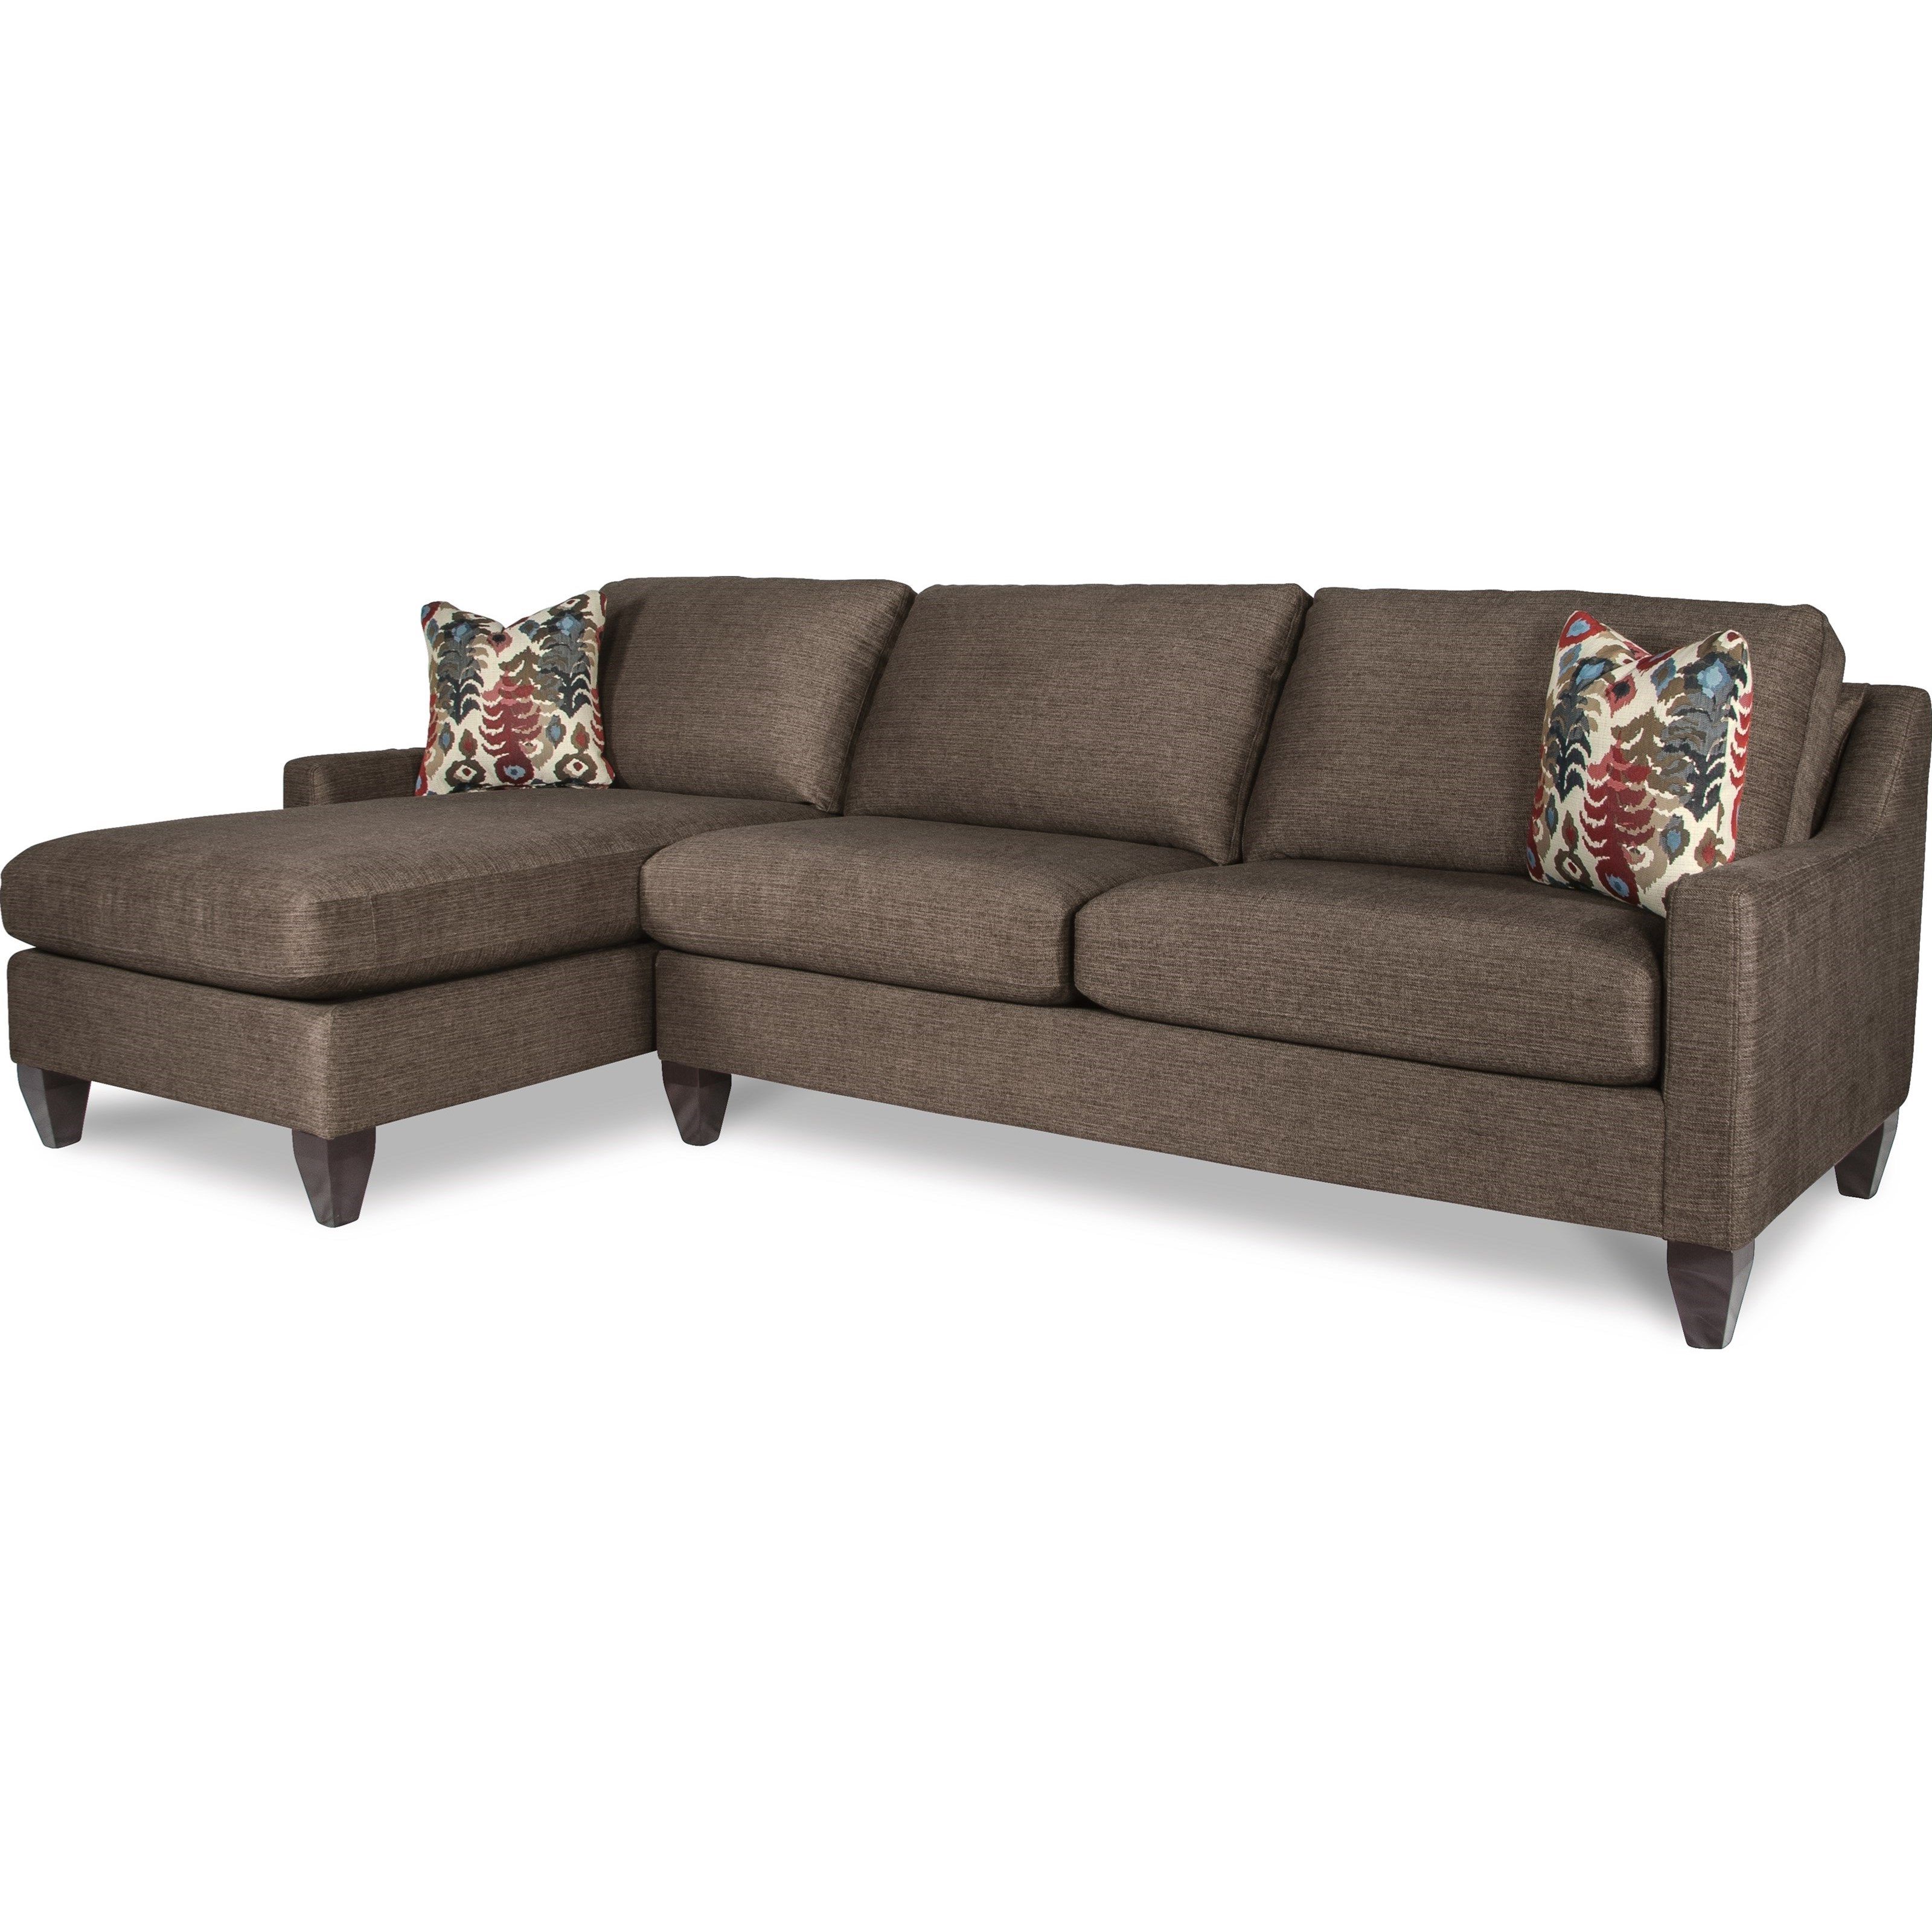 Baci Living Room For Mcdade Graphite 2 Piece Sectionals With Raf Chaise (View 12 of 20)